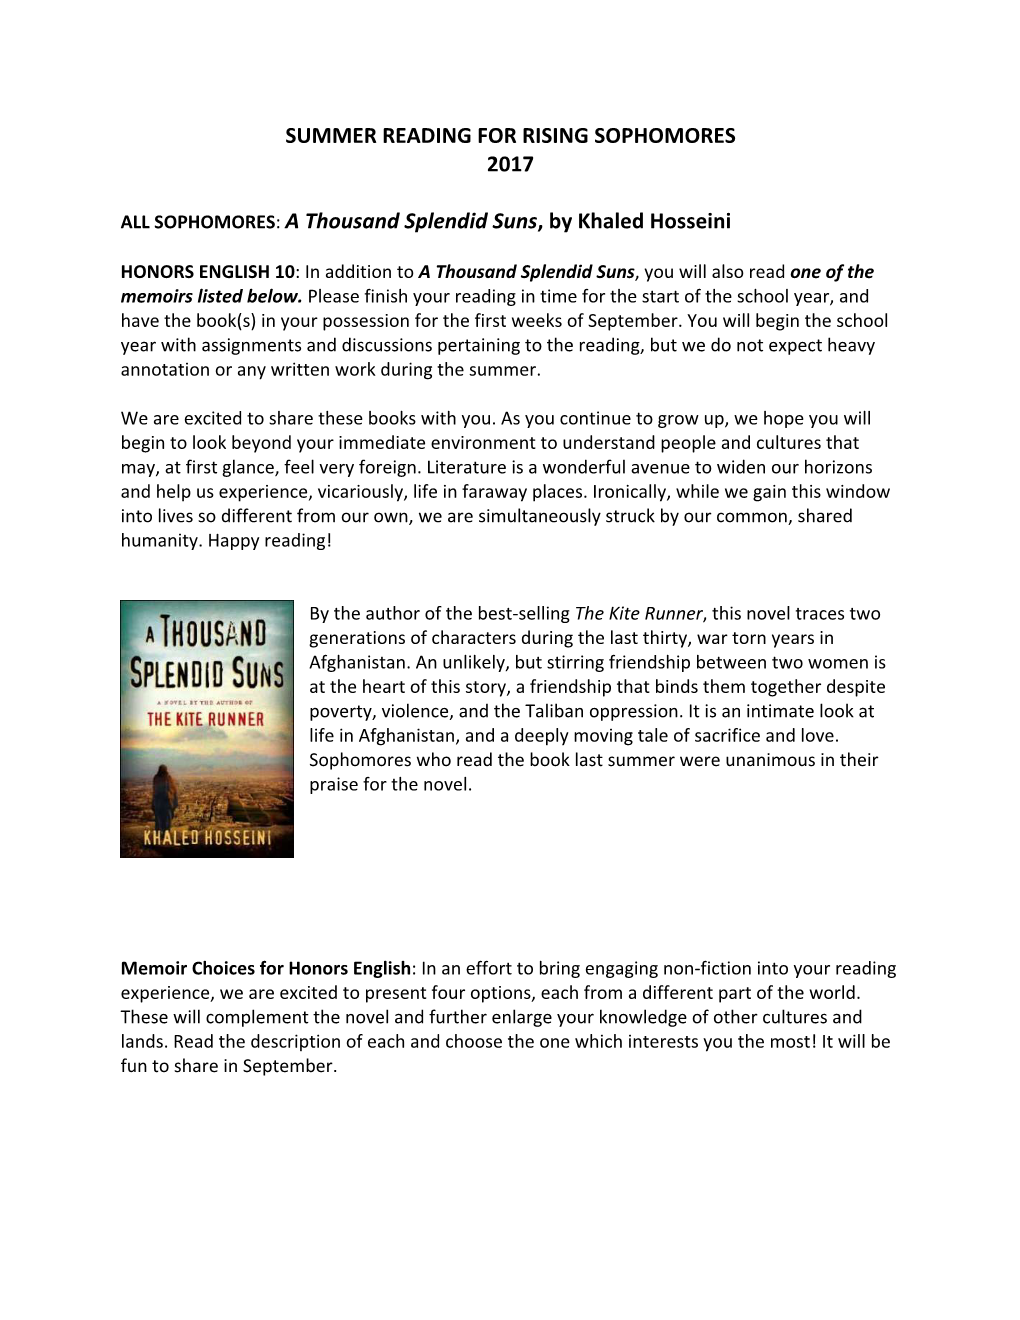 SUMMER READING for RISING SOPHOMORES 2017 ALL SOPHOMORES: a Thousand Splendid Suns, by Khaled Hosseini